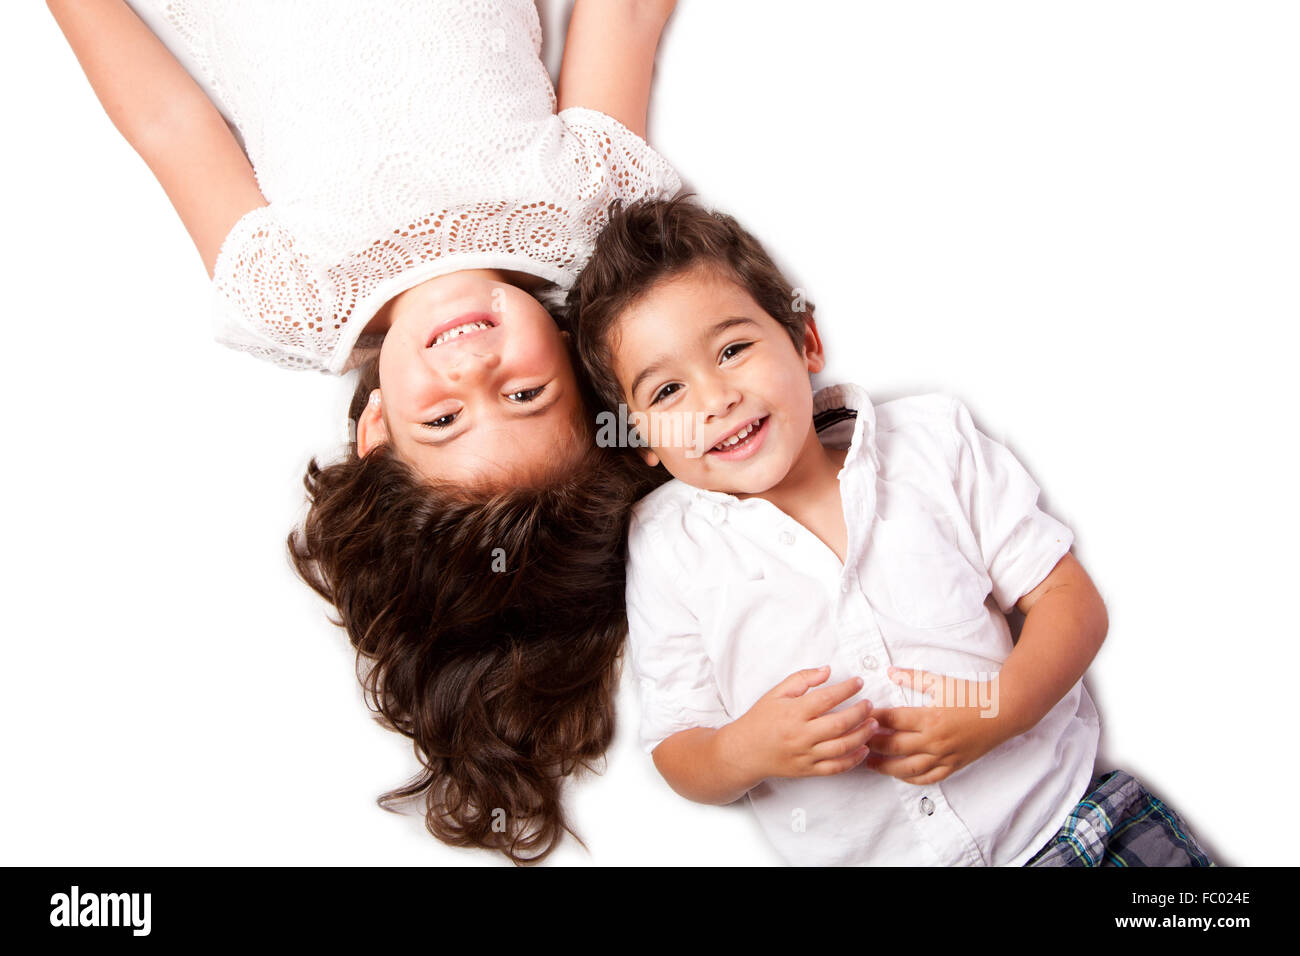 Family siblings laying together Stock Photo